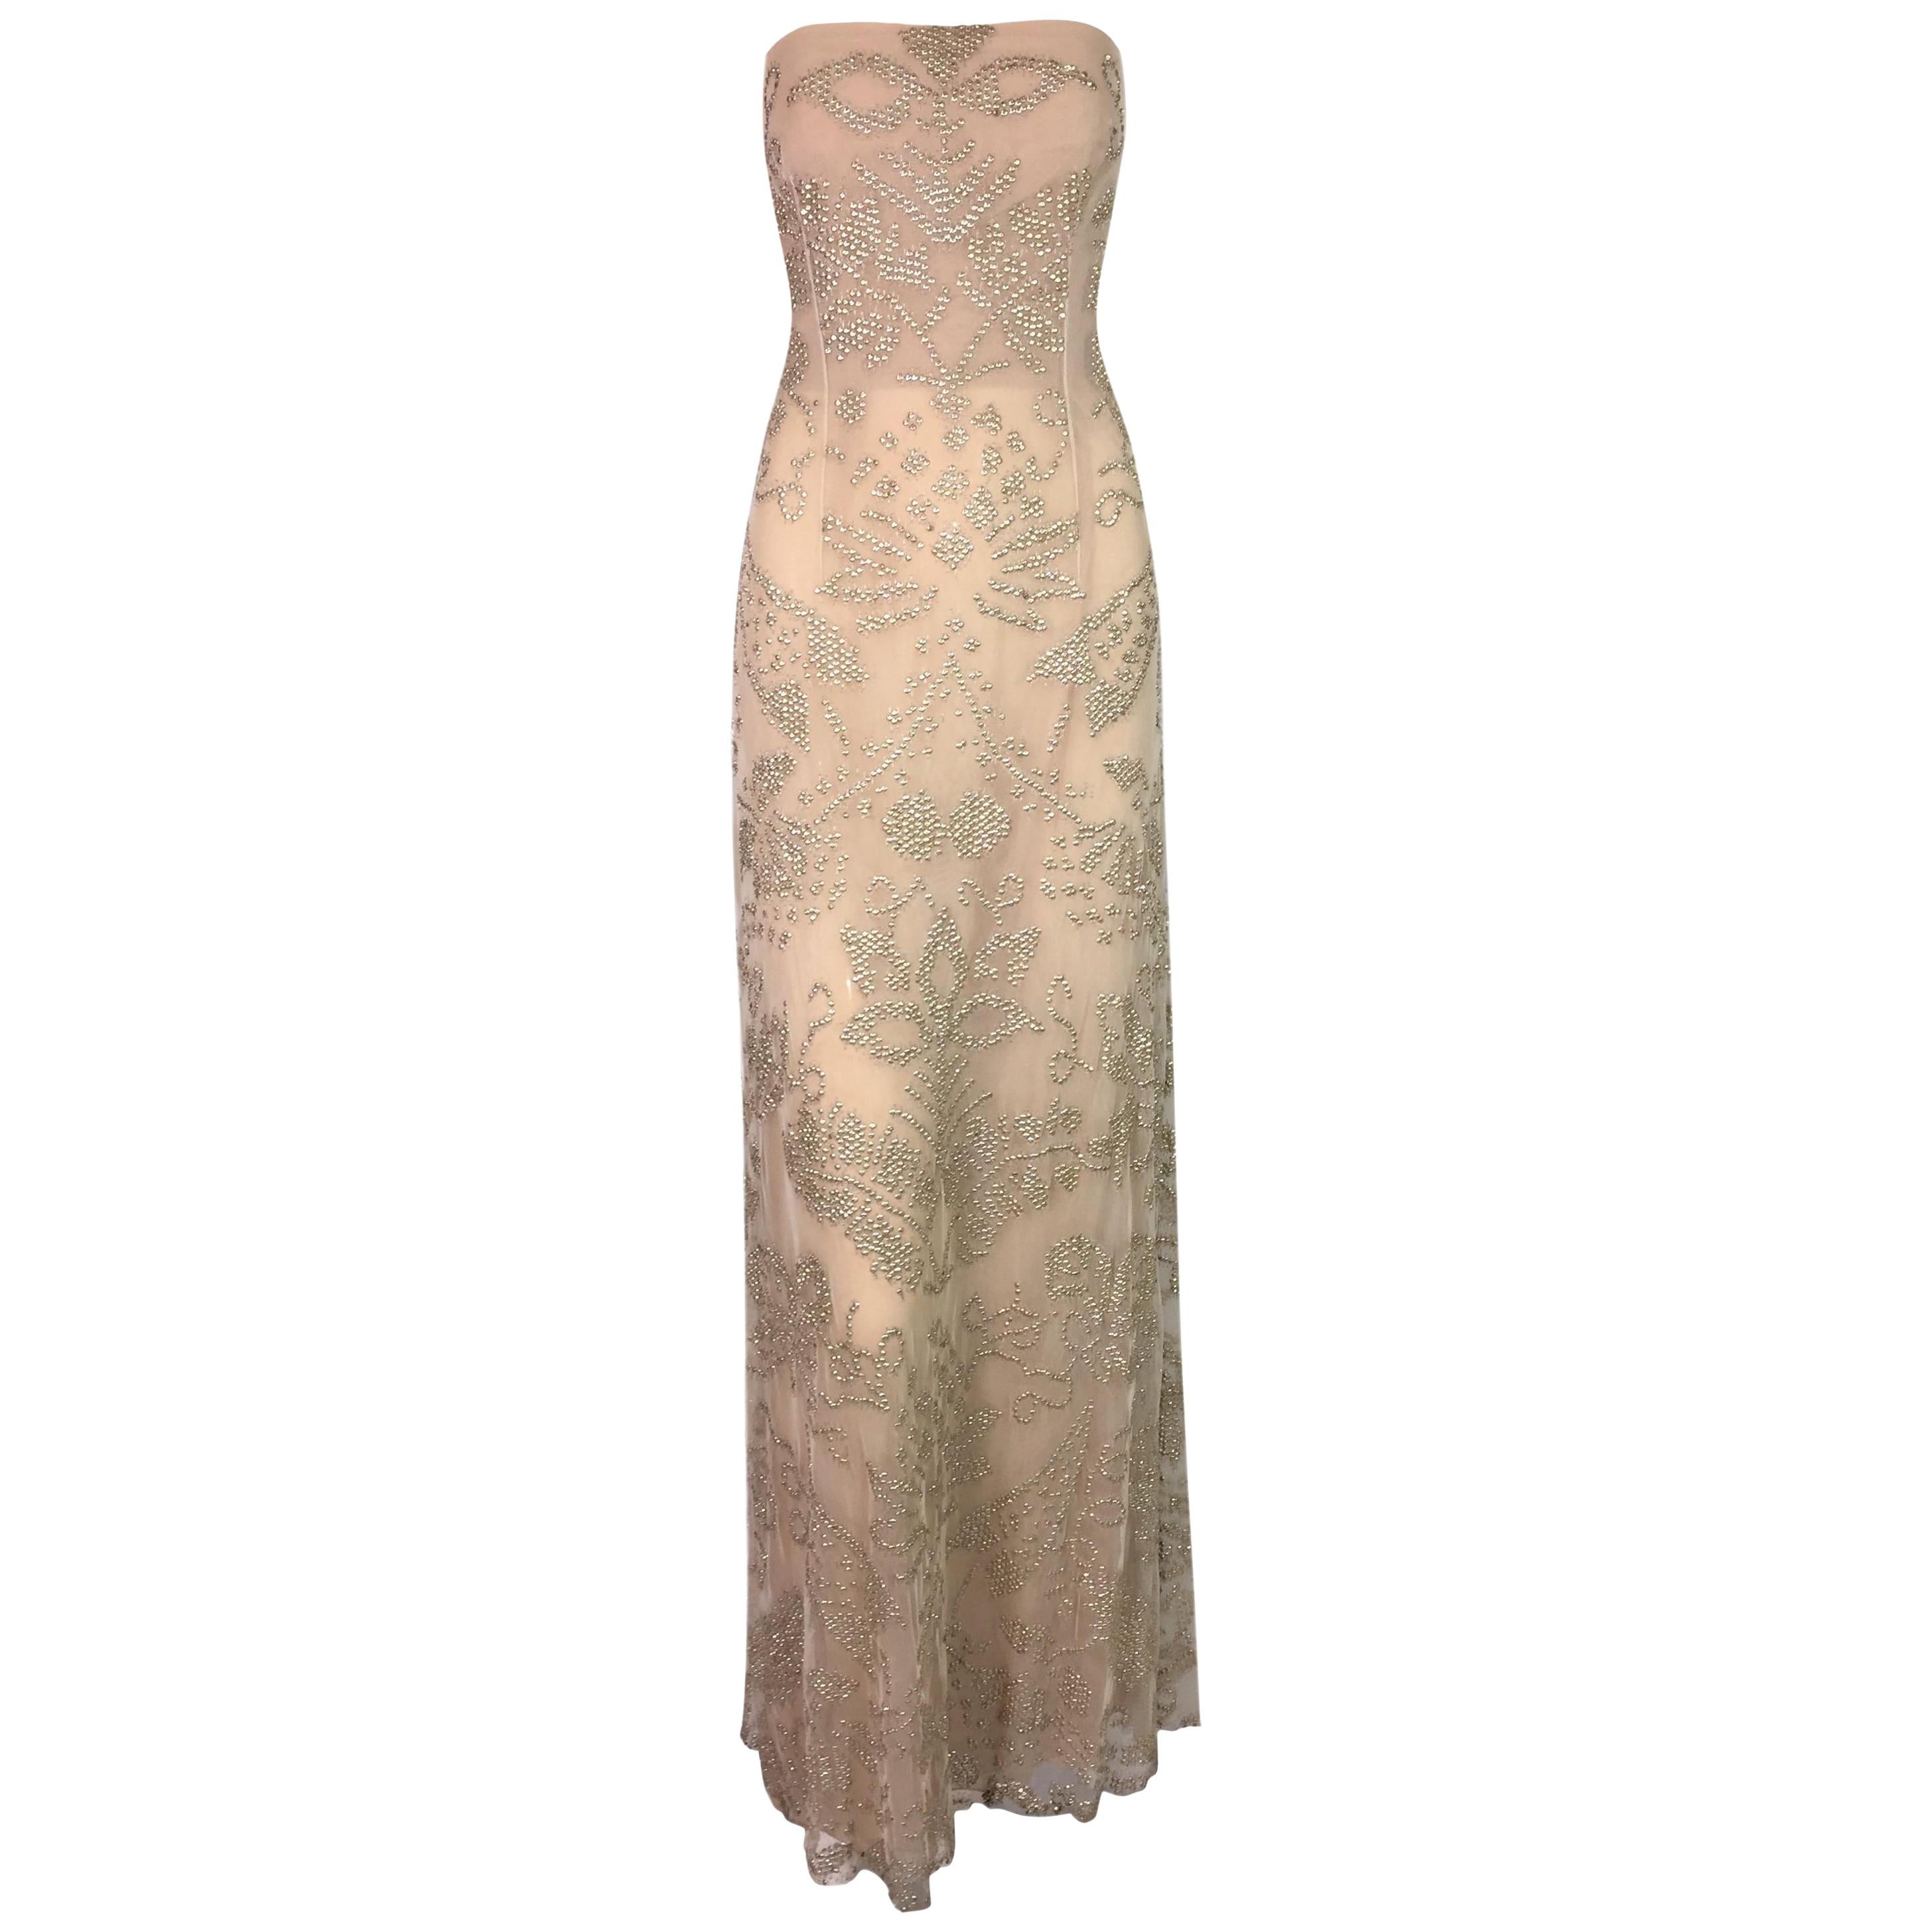 S/S 2000 Gucci by Tom Ford Semi-Sheer Sequin Nude Strapless Dress Gown